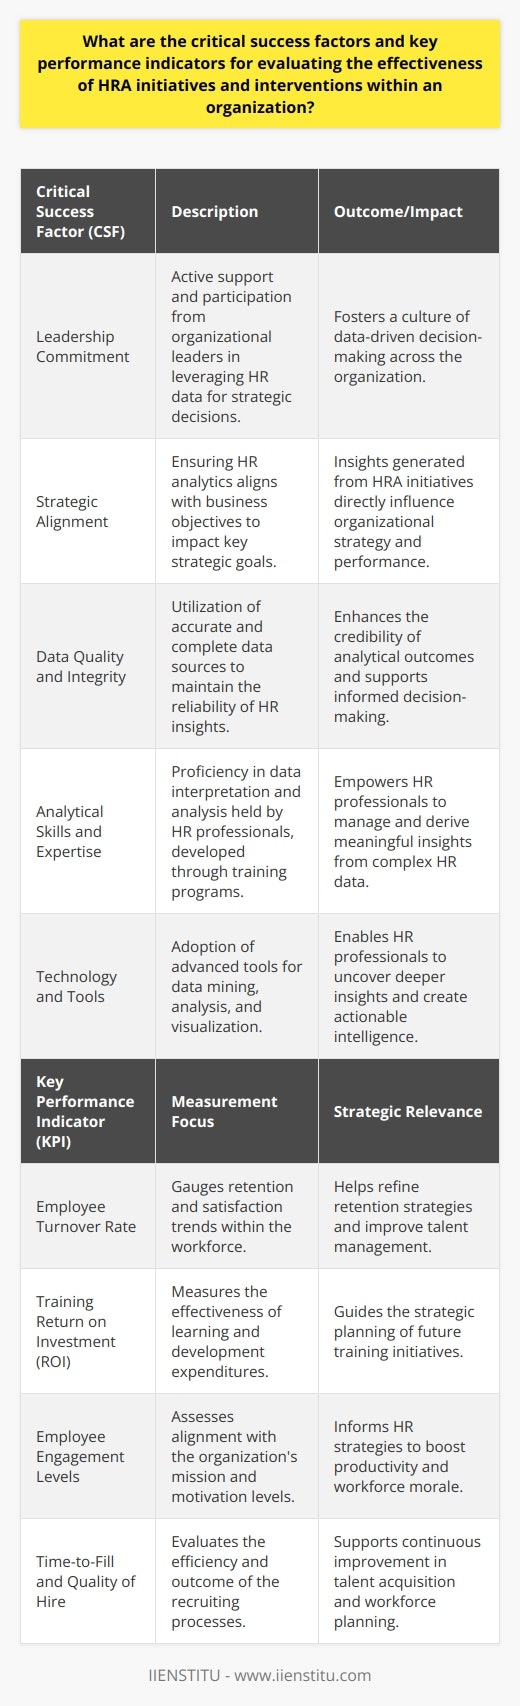 Human Resource Analytics (HRA) has become an increasingly vital aspect of strategic HR management. It plays a critical role in analyzing workforce data and guiding informed decisions that align with business objectives. Understanding and evaluating the effectiveness of HRA initiatives and interventions is multifaceted, involving both Critical Success Factors (CSFs) and Key Performance Indicators (KPIs).**Critical Success Factors for HRA Initiatives**1. **Leadership Commitment:**   A cornerstone for any successful HRA initiative is the unwavering support of the organization's leadership. Leaders must not only endorse HRA endeavors but also actively participate in leveraging HR data to inform strategic decisions. Their engagement signifies the initiative's importance and fosters a culture that values data-driven management.2. **Strategic Alignment:**   HRA must be intertwined with organizational strategies. It is essential to ensure that the focus of HR analytics aligns with business objectives so that insights generated can directly influence key strategic goals, such as improving productivity or retaining top talent.3. **Data Quality and Integrity:**   The accuracy and completeness of data are paramount in HRA. High-quality data sources are prerequisites to extract reliable insights. Organizations should implement robust data management practices to cleanse, integrate, and secure their HR data.4. **Analytical Skills and Expertise:**   To derive meaningful insights from complex datasets requires a particular skill set. Therefore, having HR professionals adept in data interpretation and analysis is crucial. Organizations often foster these talents through professional development programs like those offered by IIENSTITU, which enhance HR practitioners' competencies in effectively managing and making sense of Big Data.5. **Technology and Tools:**   Utilizing the right technological solutions can amplify the effectiveness of HRA initiatives. Tools that allow for sophisticated data mining, analysis, and visual representation enable HR professionals to draw deeper and more actionable insights.**Key Performance Indicators for HRA Effectiveness**1. **Employee Turnover Rate:**   KPIs such as turnover rate offer a direct view into employee retention and satisfaction trends. Analyzing patterns within turnover data can inform retention strategies and talent management practices.2. **Training Return on Investment (ROI):**   Evaluating training programs in terms of ROI enables organizations to measure the effectiveness of their learning and development investments and align future training initiatives with strategic workforce planning.3. **Employee Engagement Levels:**   Engagement surveys can yield KPIs that reveal the alignment of employees with the organization's mission and their motivation levels. This KPI is often correlated with productivity and can drive HR interventions to bolster workforce morale.4. **Time-to-Fill and Quality of Hire:**   The efficiency and effectiveness of recruiting processes are reflected in KPIs such as time-to-fill vacant positions and the resulting quality of hire. These metrics support continual improvement in talent acquisition strategies.In conclusion, the critical success factors of leadership commitment, strategic alignment, data quality, and analytical expertise, along with measurable KPIs, provide an organization with a comprehensive framework for evaluating the effectiveness of HRA initiatives. By emphasizing these factors, organizations can foster a culture of continuous improvement and strategic HR management that contributes to overall business success.